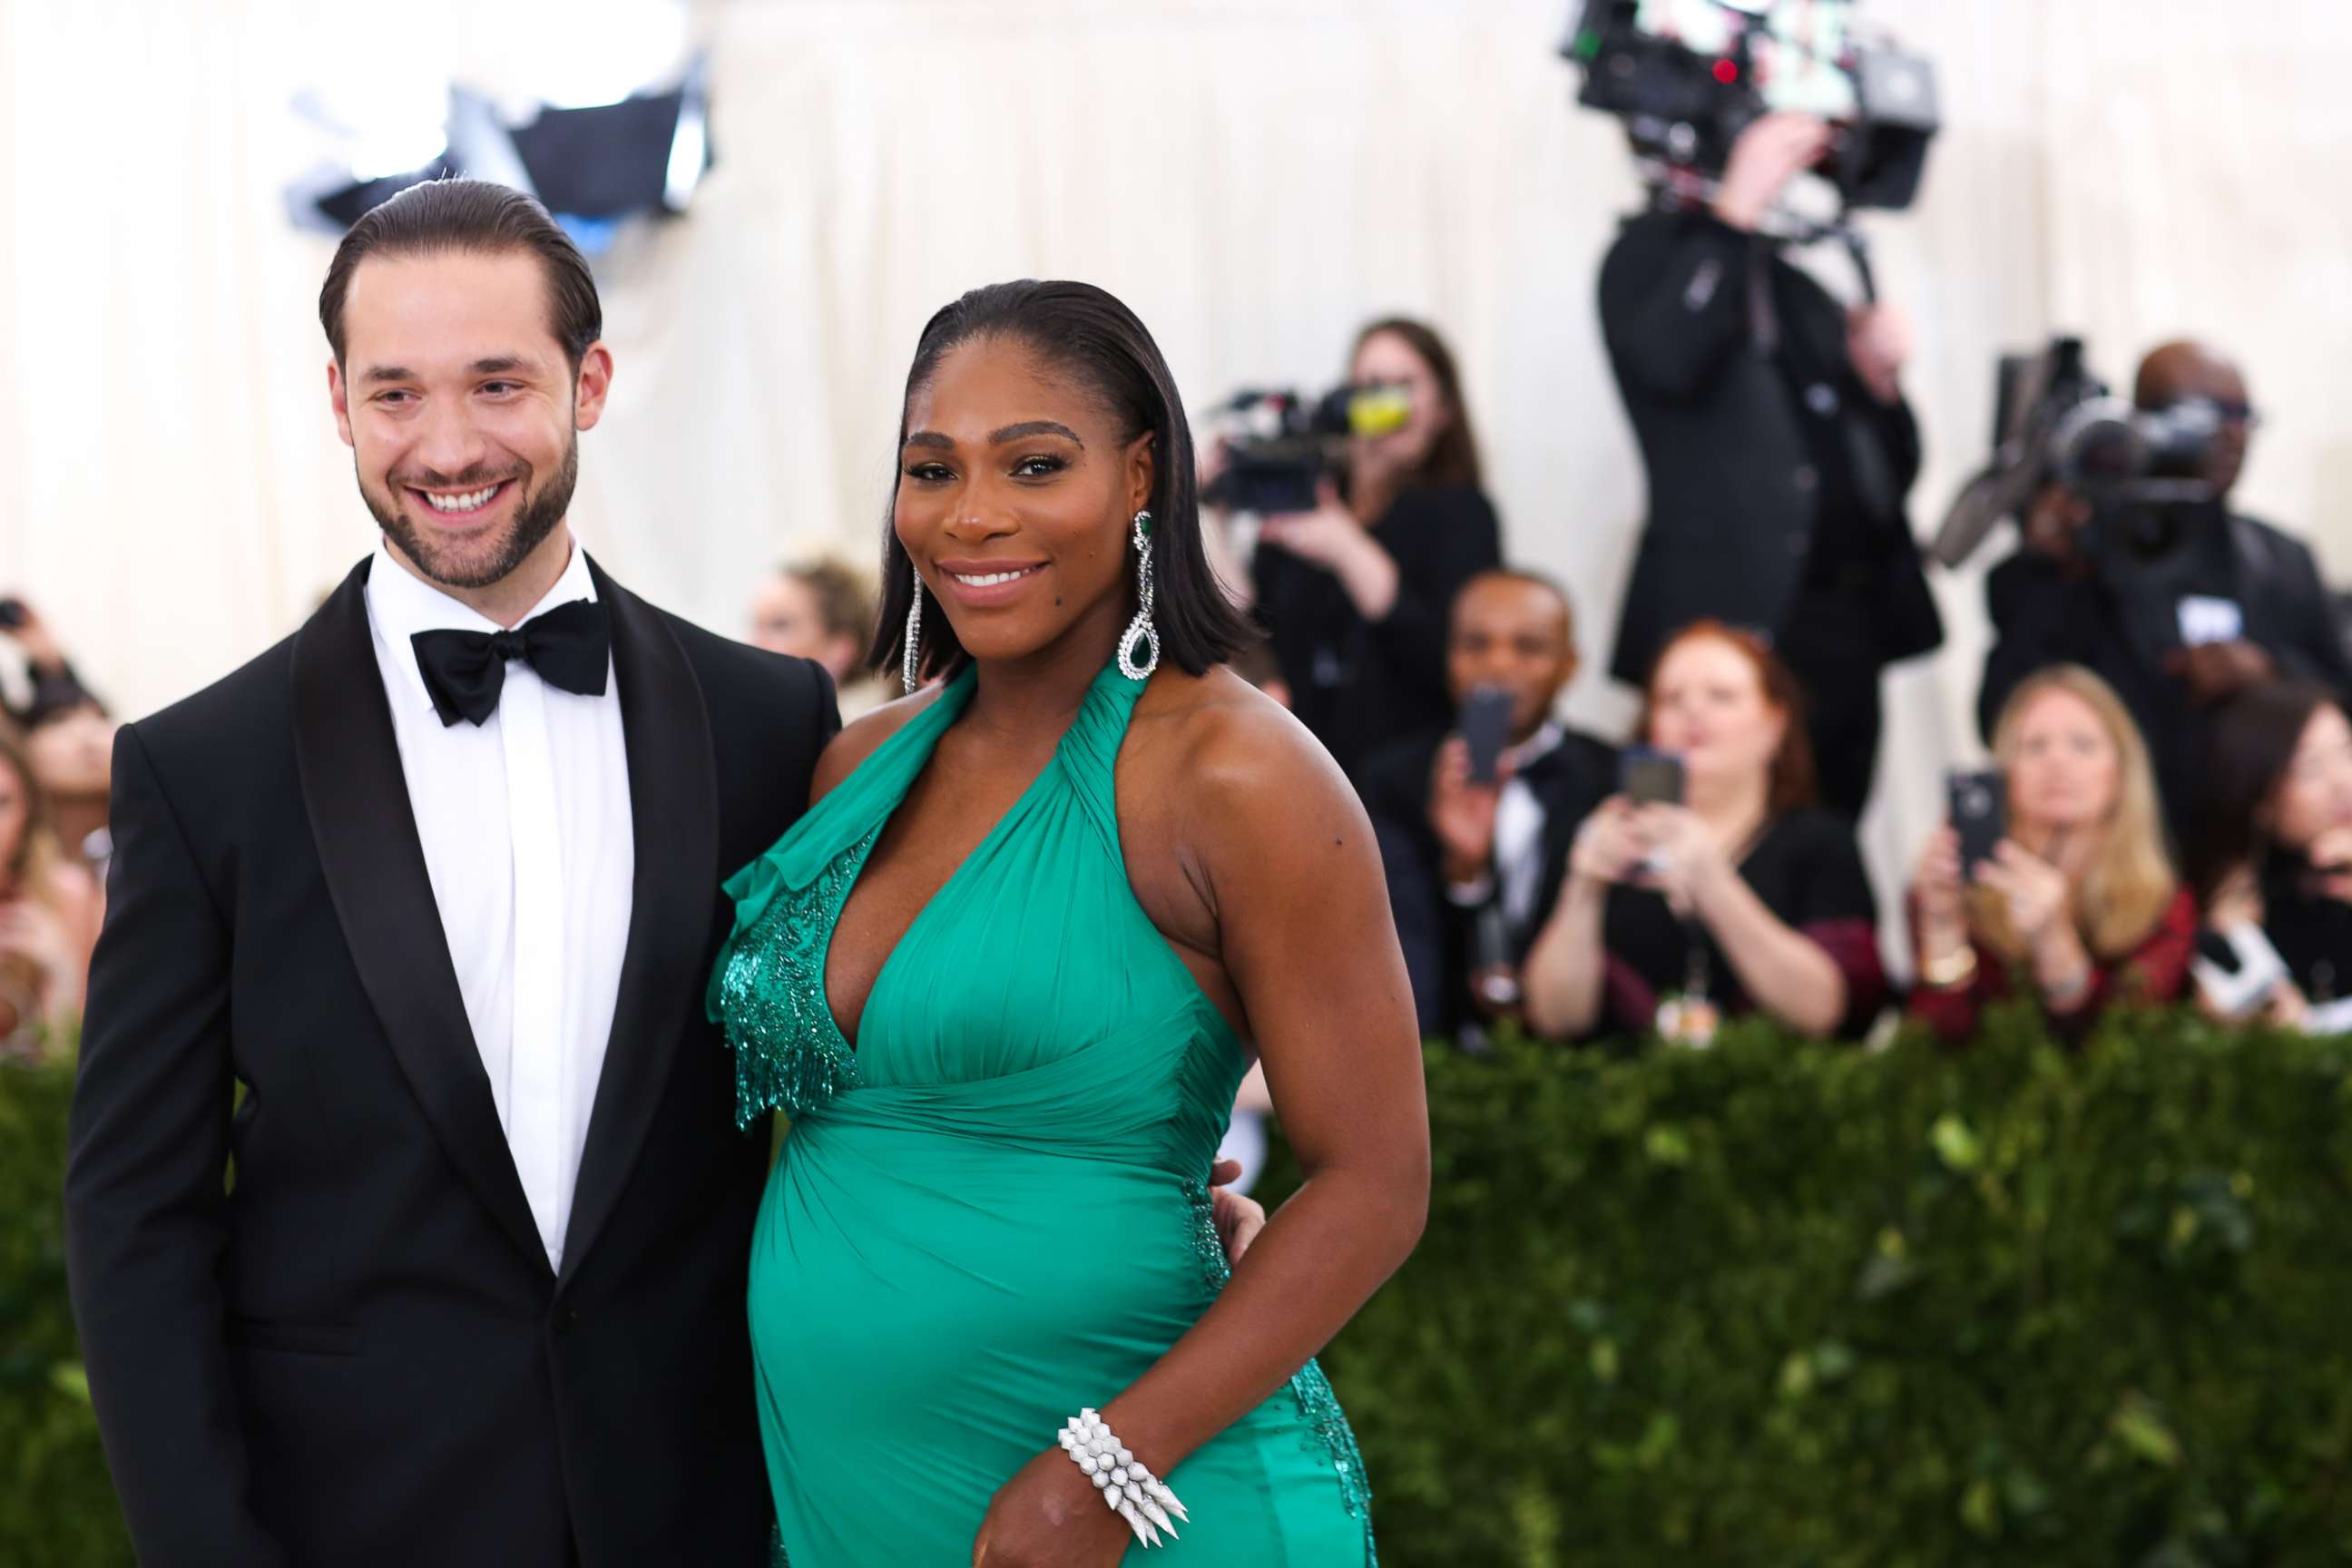 PHOTO: Serena Williams and Alexis Ohanian attend The Metropolitan Museum of Art's Costume Institute Benefit celebrating the opening of "Rei Kawakubo/Comme des Garcons: Art of the In-Between" in New York, May 1, 2017.